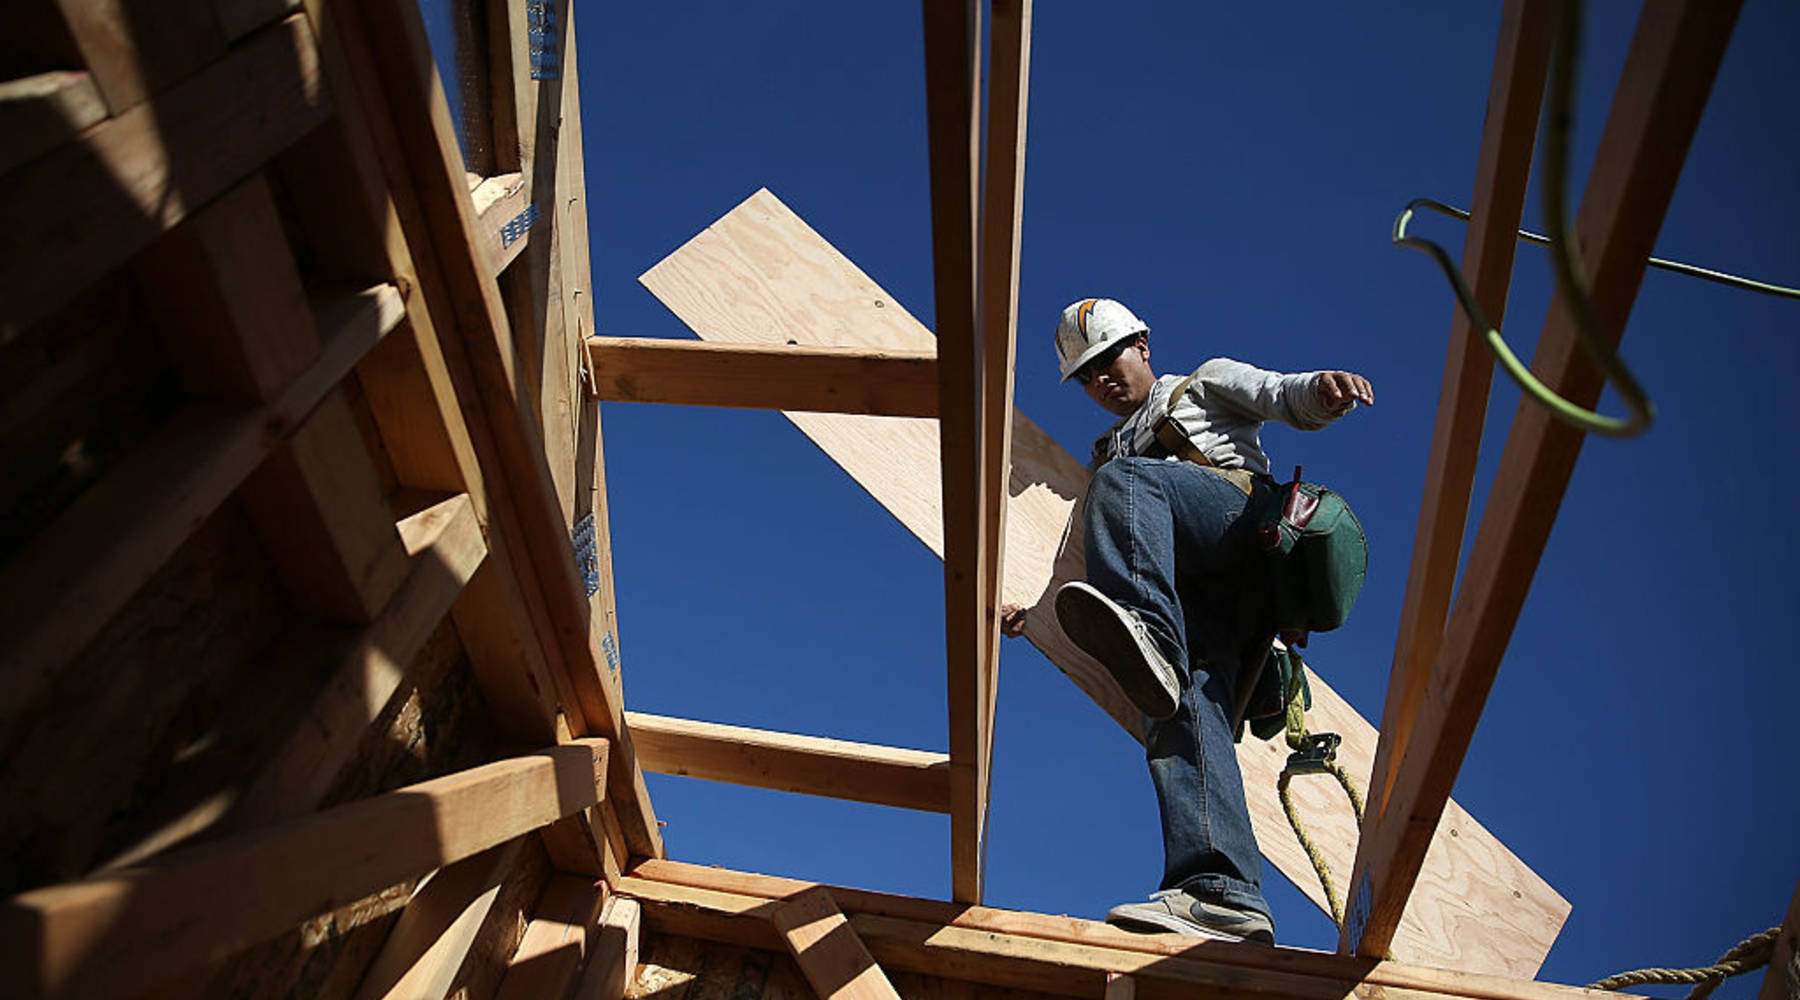 New homes taking longer to build because of supplies, labor shortage